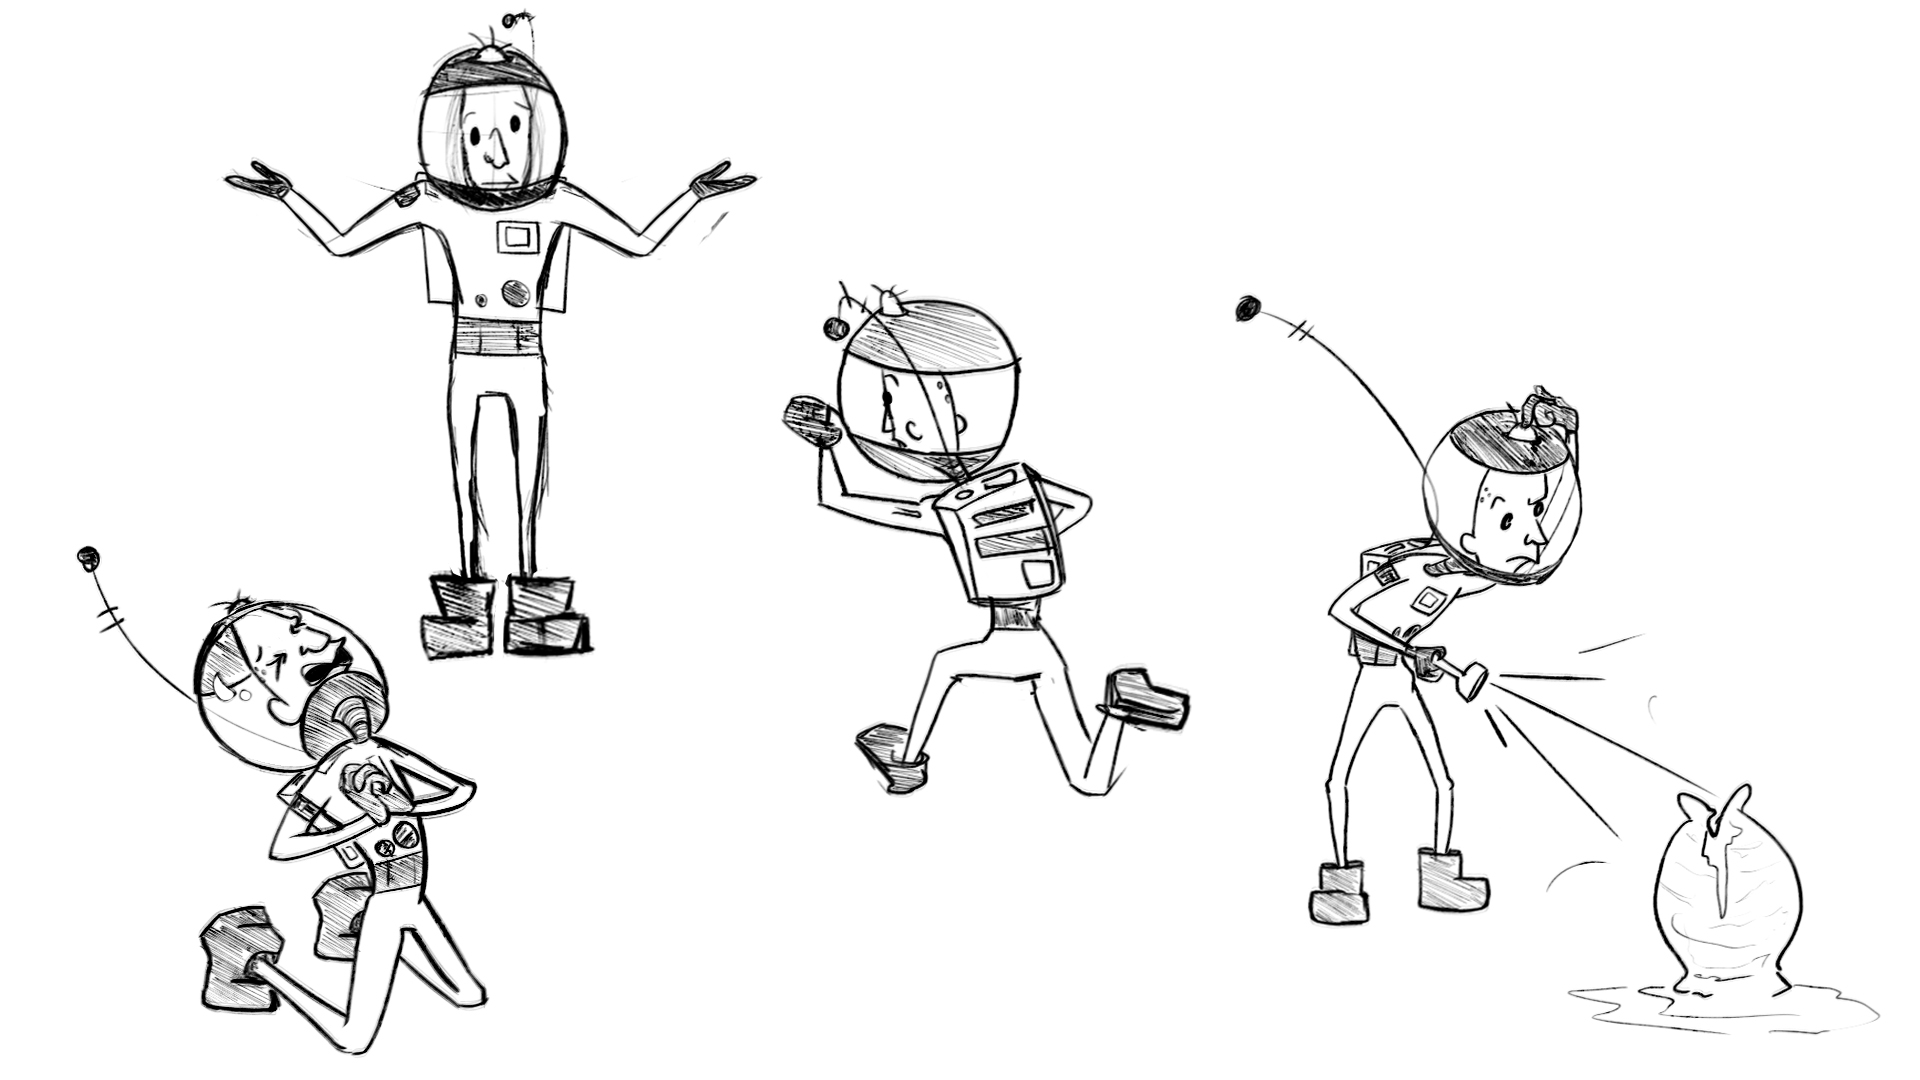 Characters Designed for CAGD 345